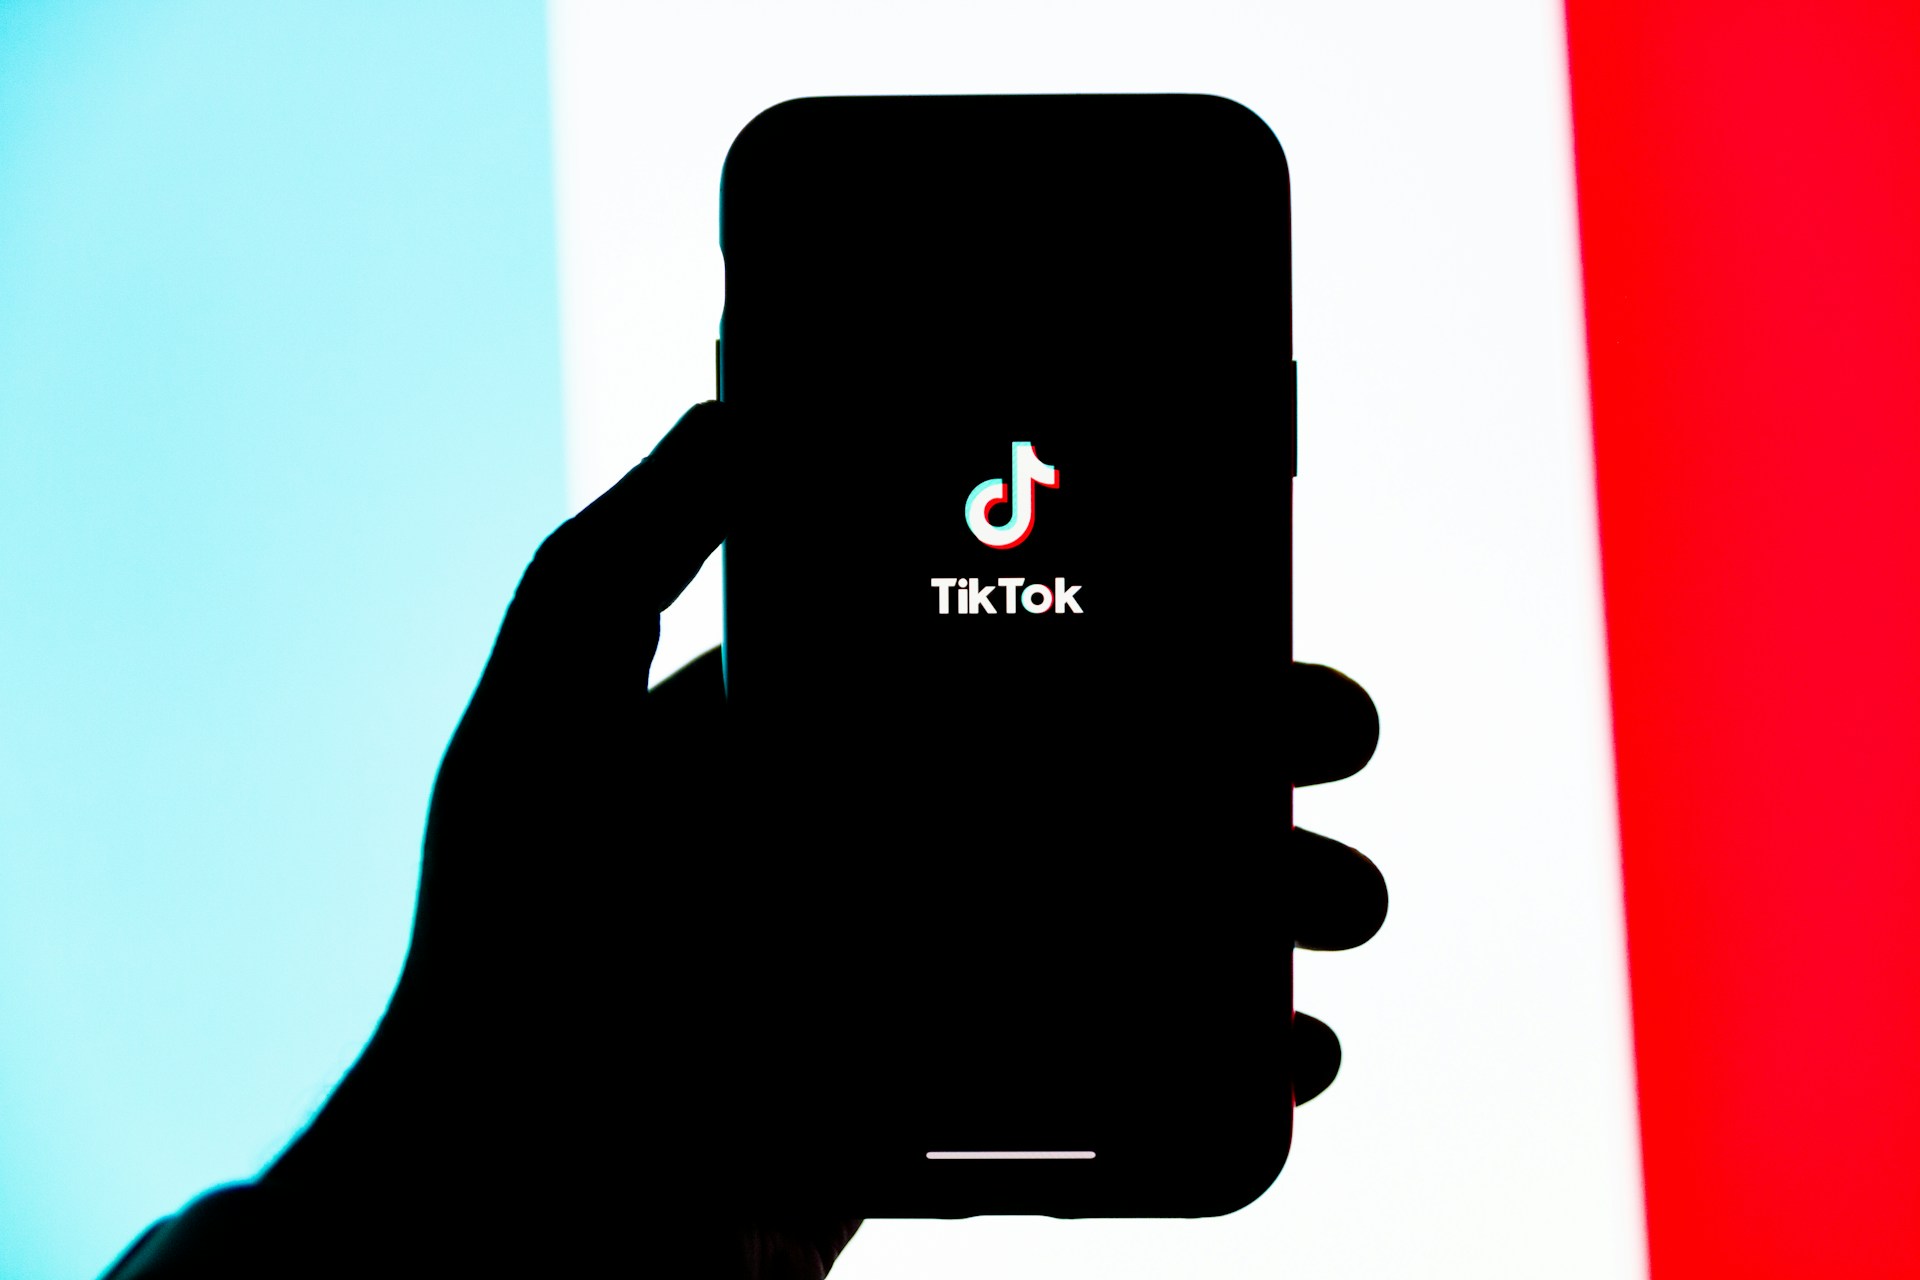 TikTok has launched a new Creator Rewards Program, incentivizing creators to produce high-quality, longer videos optimized for search queries to boost engagement and advertising potential.